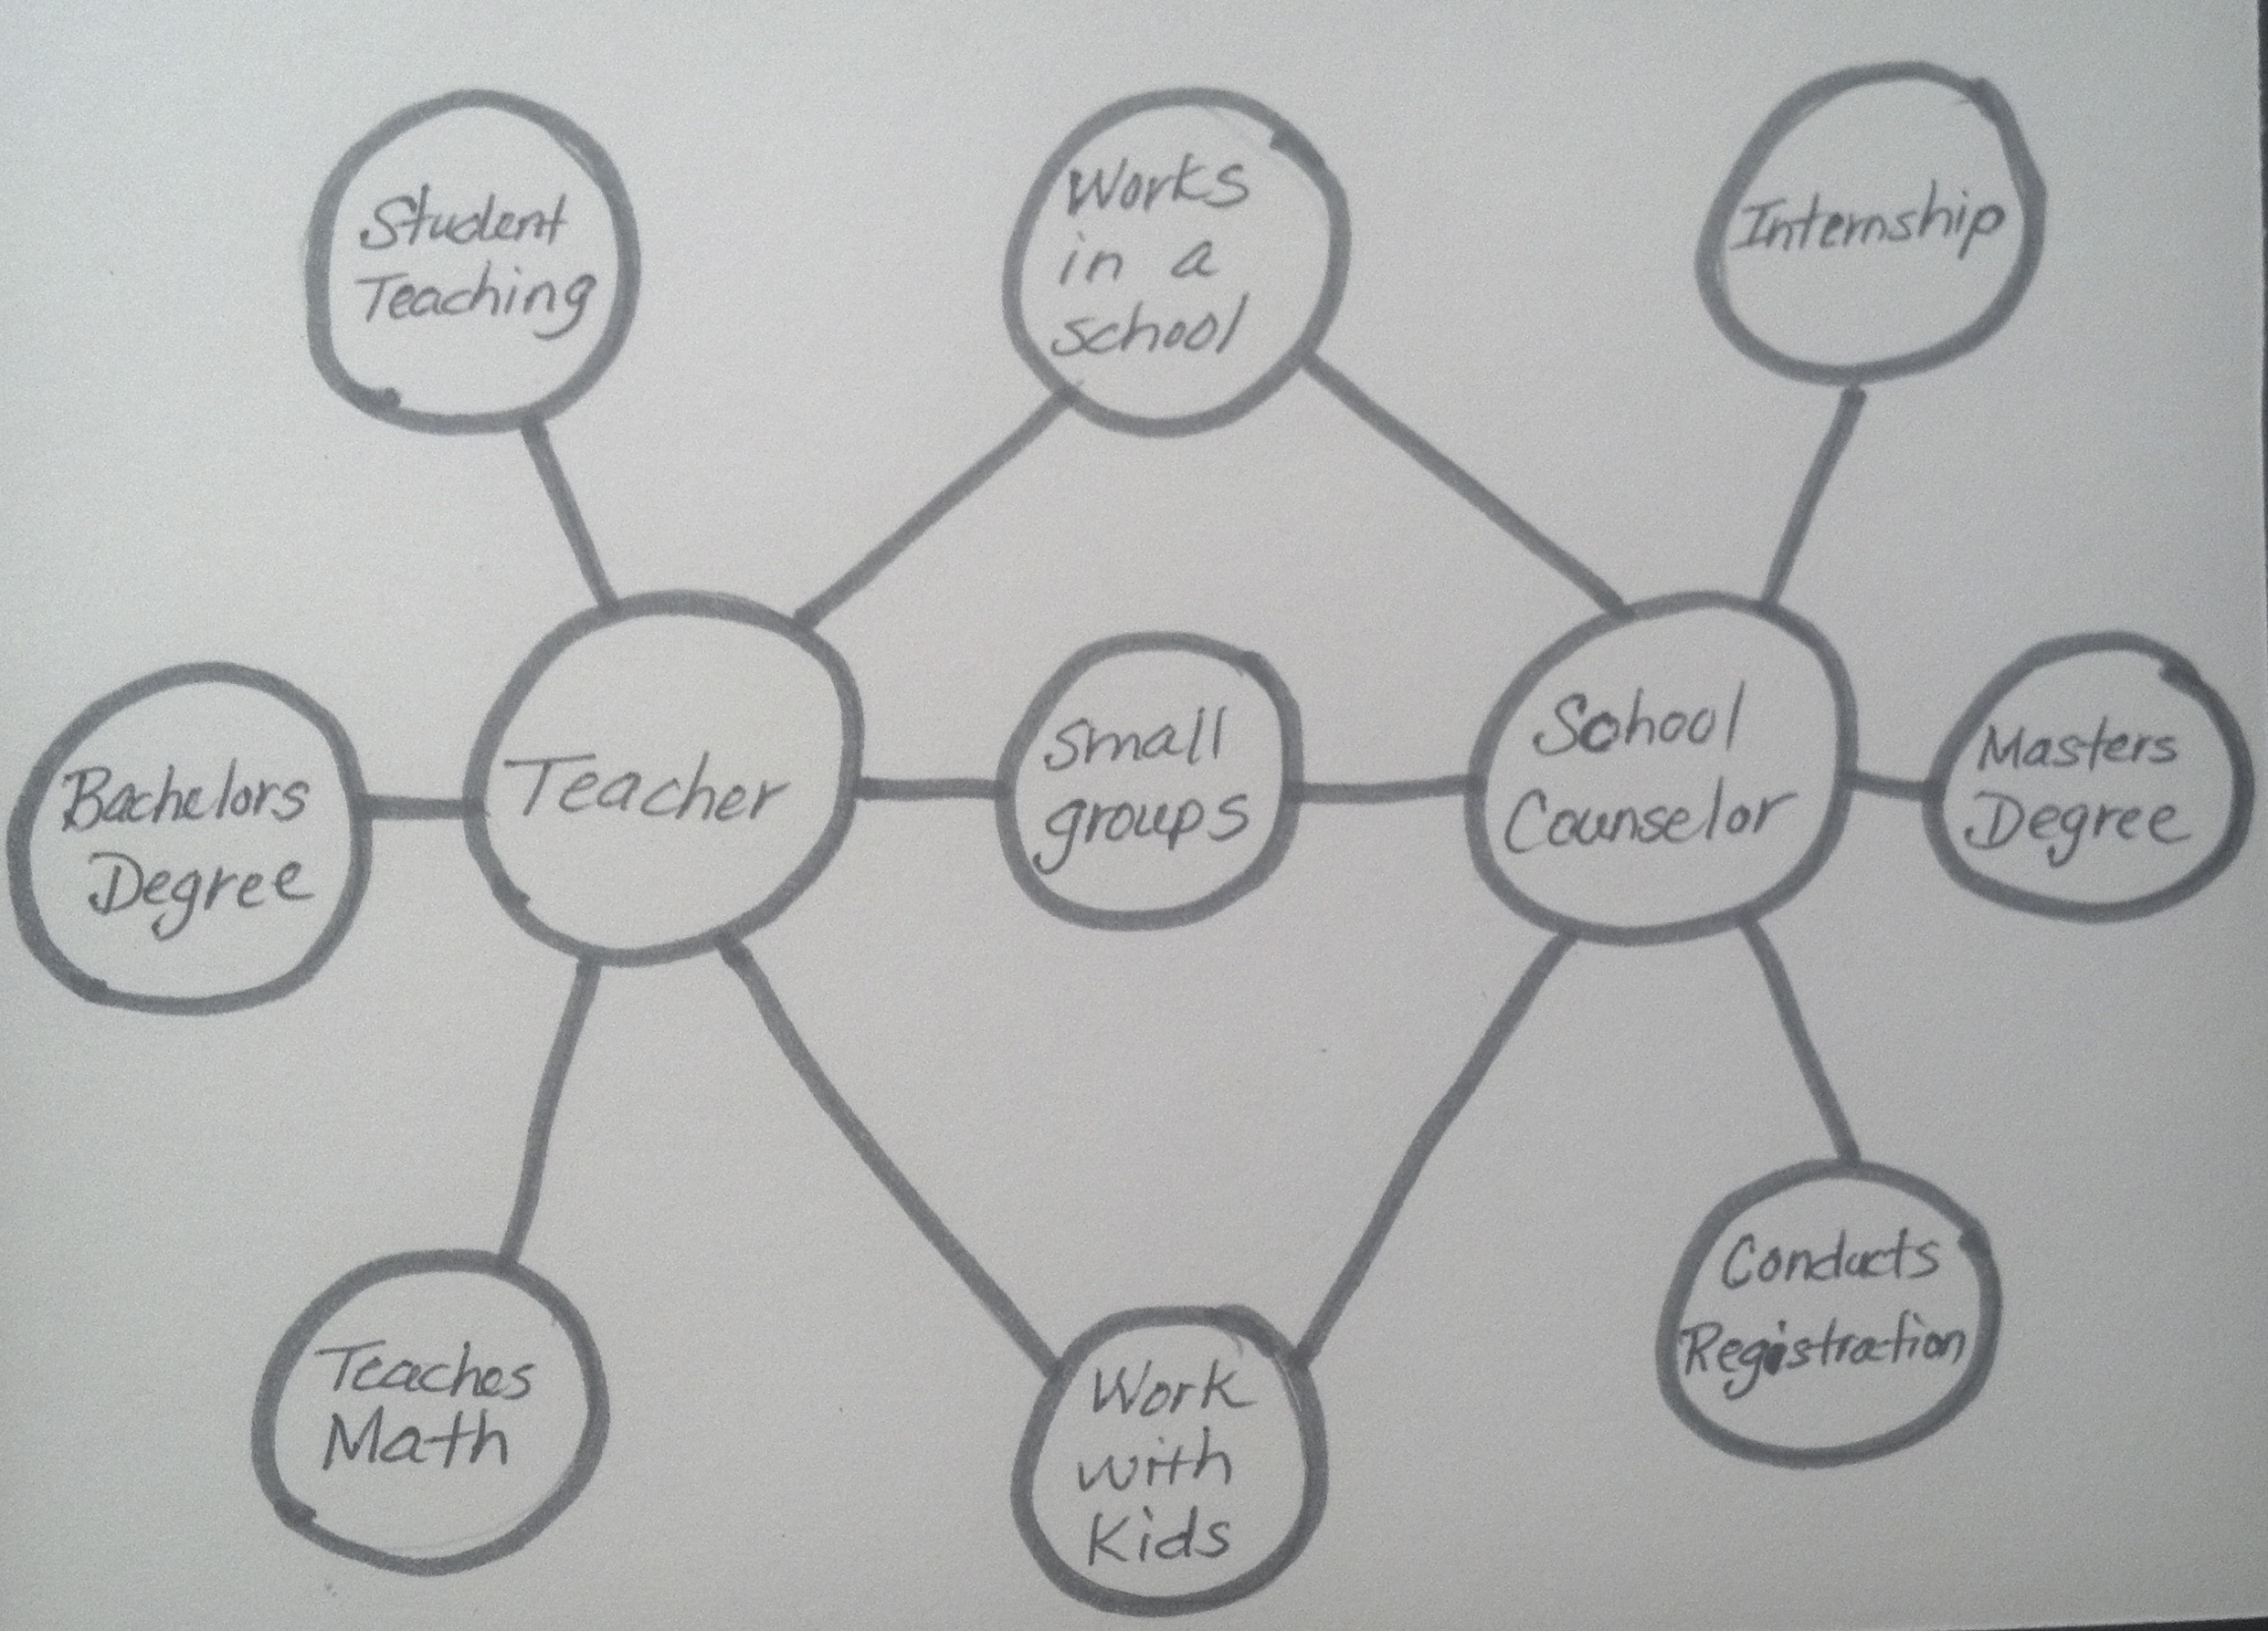 Using Thinking Maps in School Counseling: Careers | Savvy School Counselor